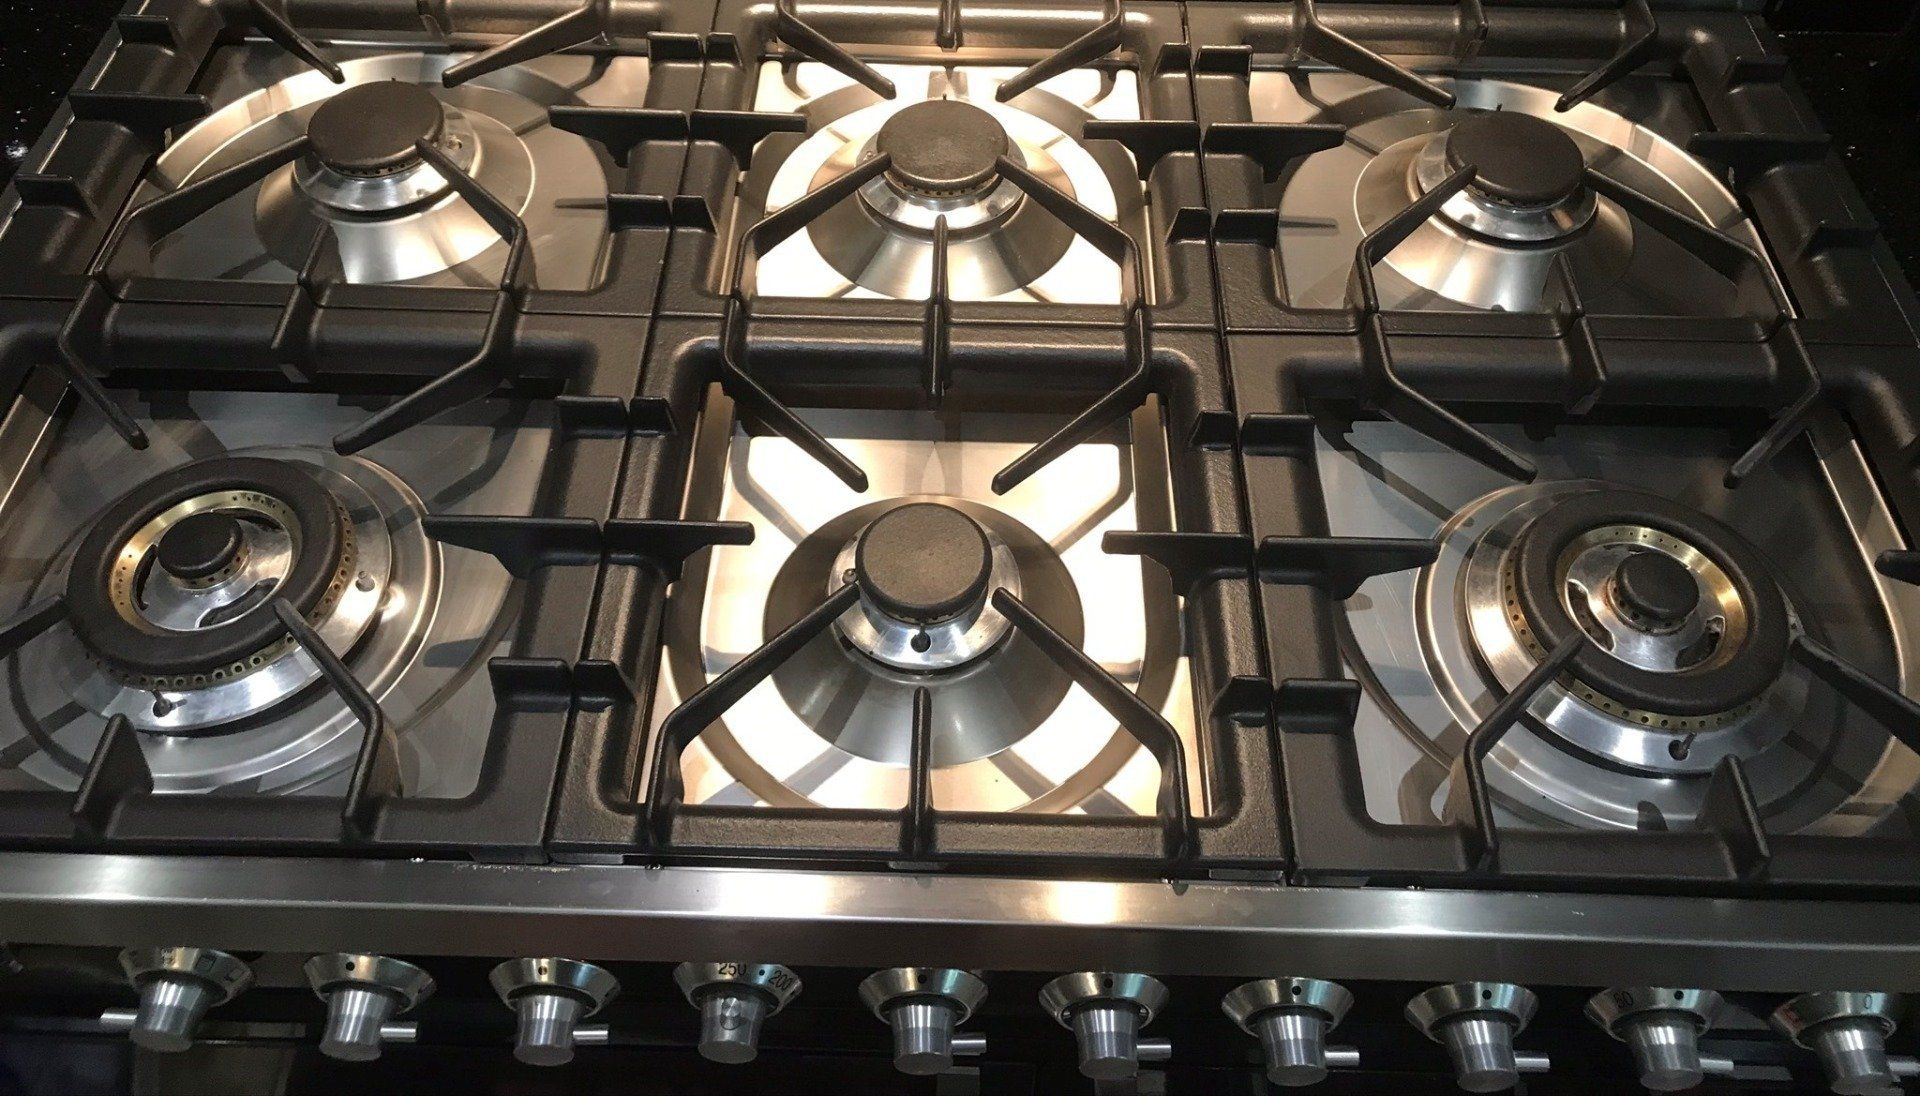 Oven cleaning in Newport, Shropshire